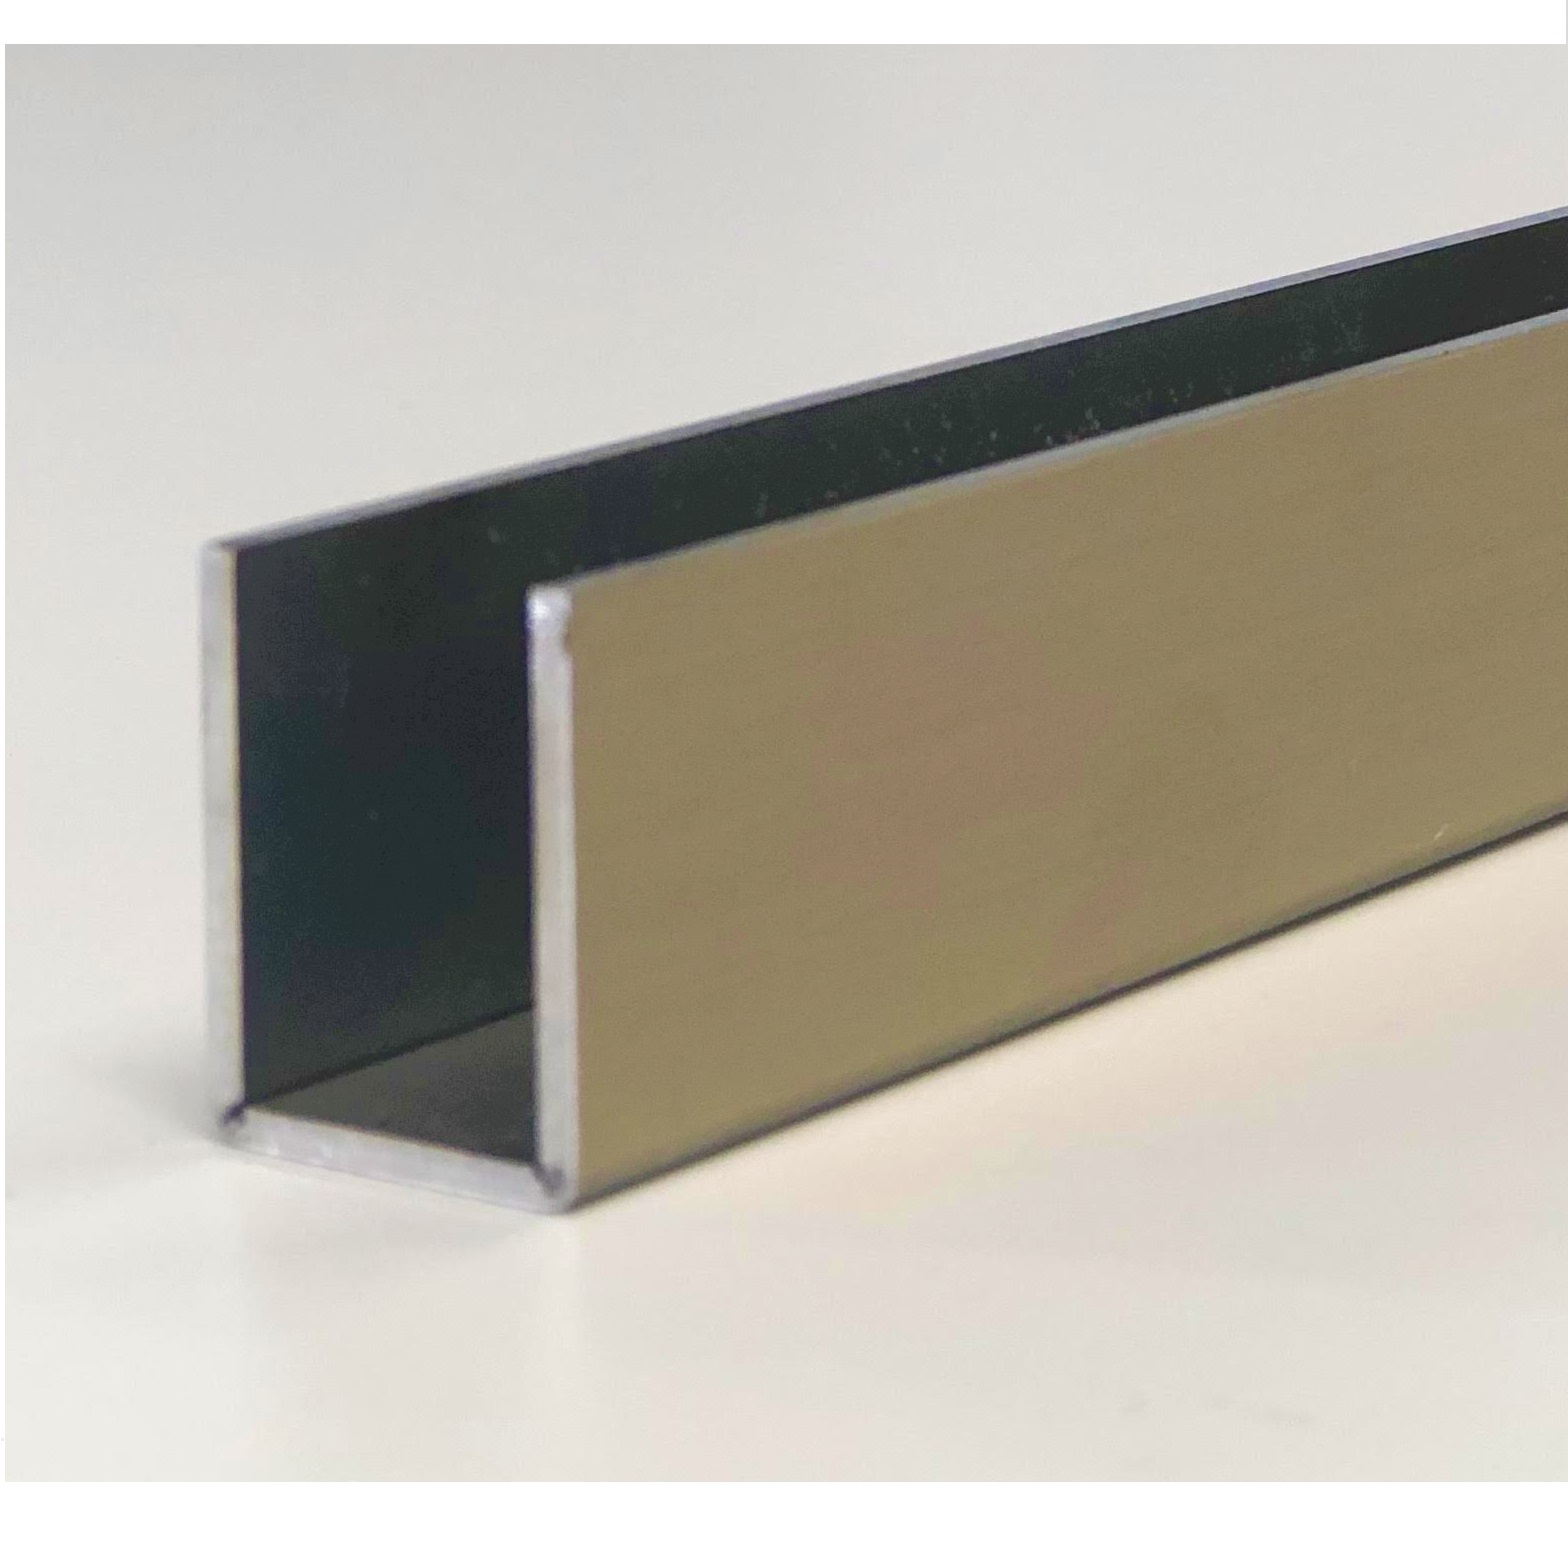 Channel 20x15 (Brushed Gold) 304 Stainless Steel Channel 2100mm